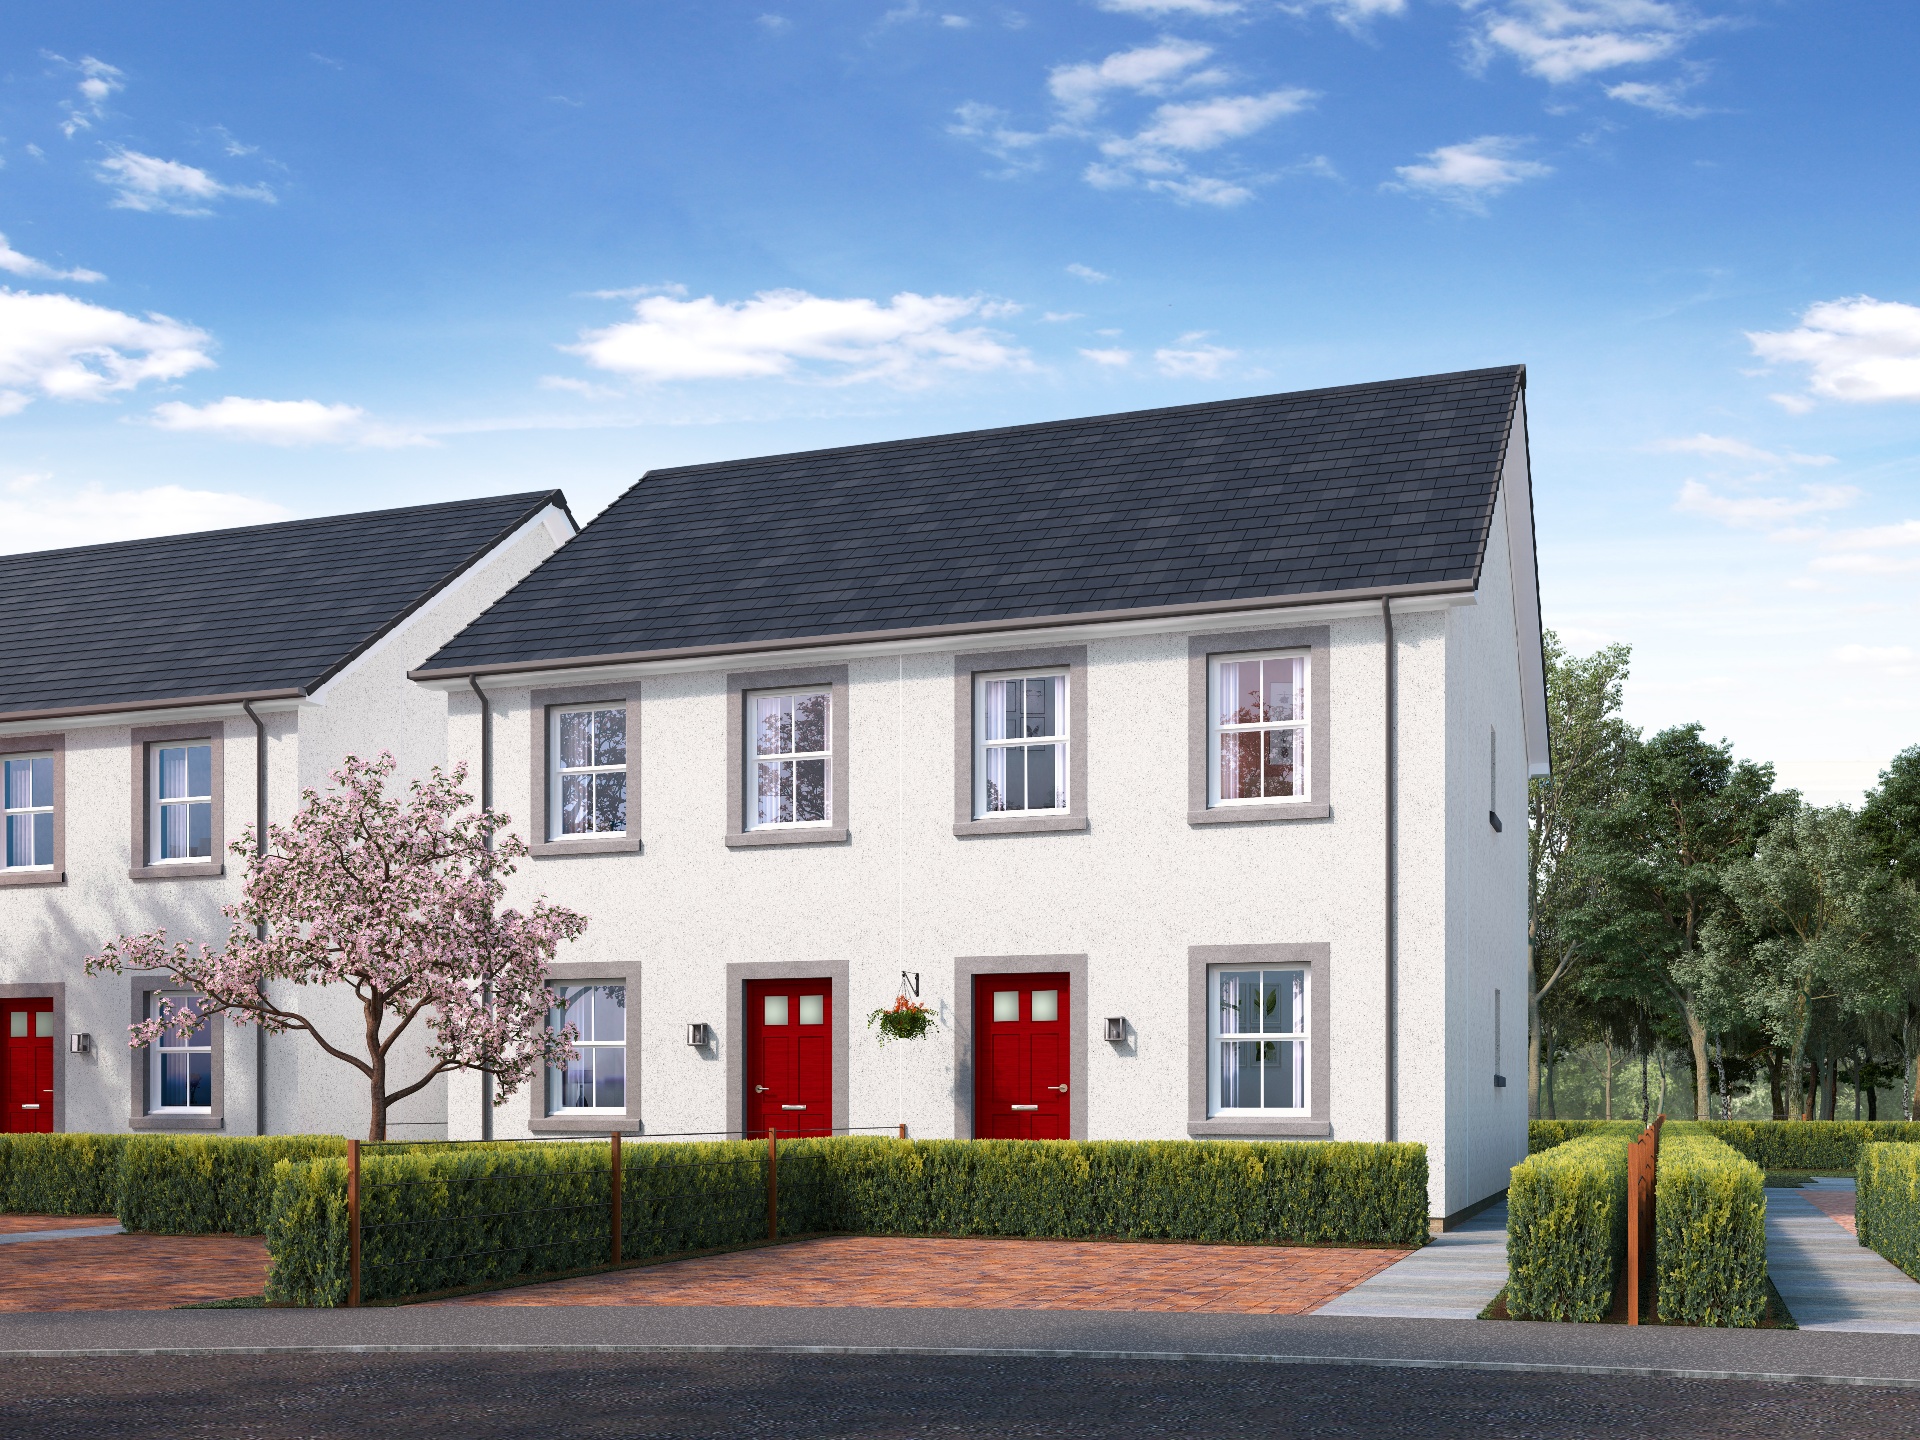 New Perthshire homes available to buy through Caledonia shared equity scheme